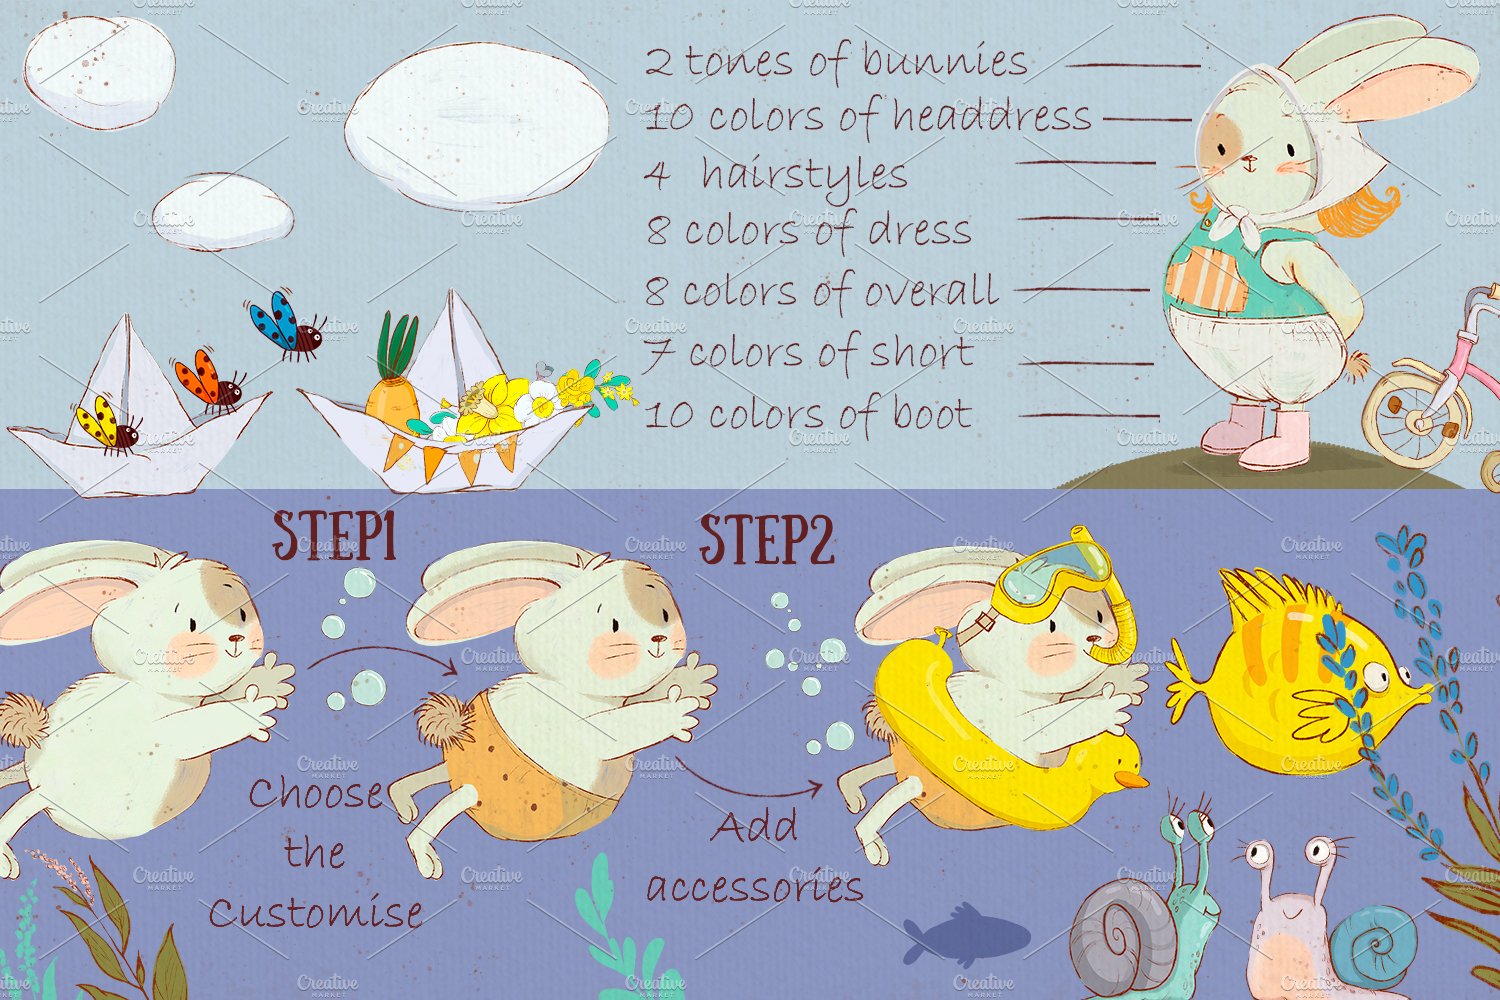 Some steps to your happy Easter.